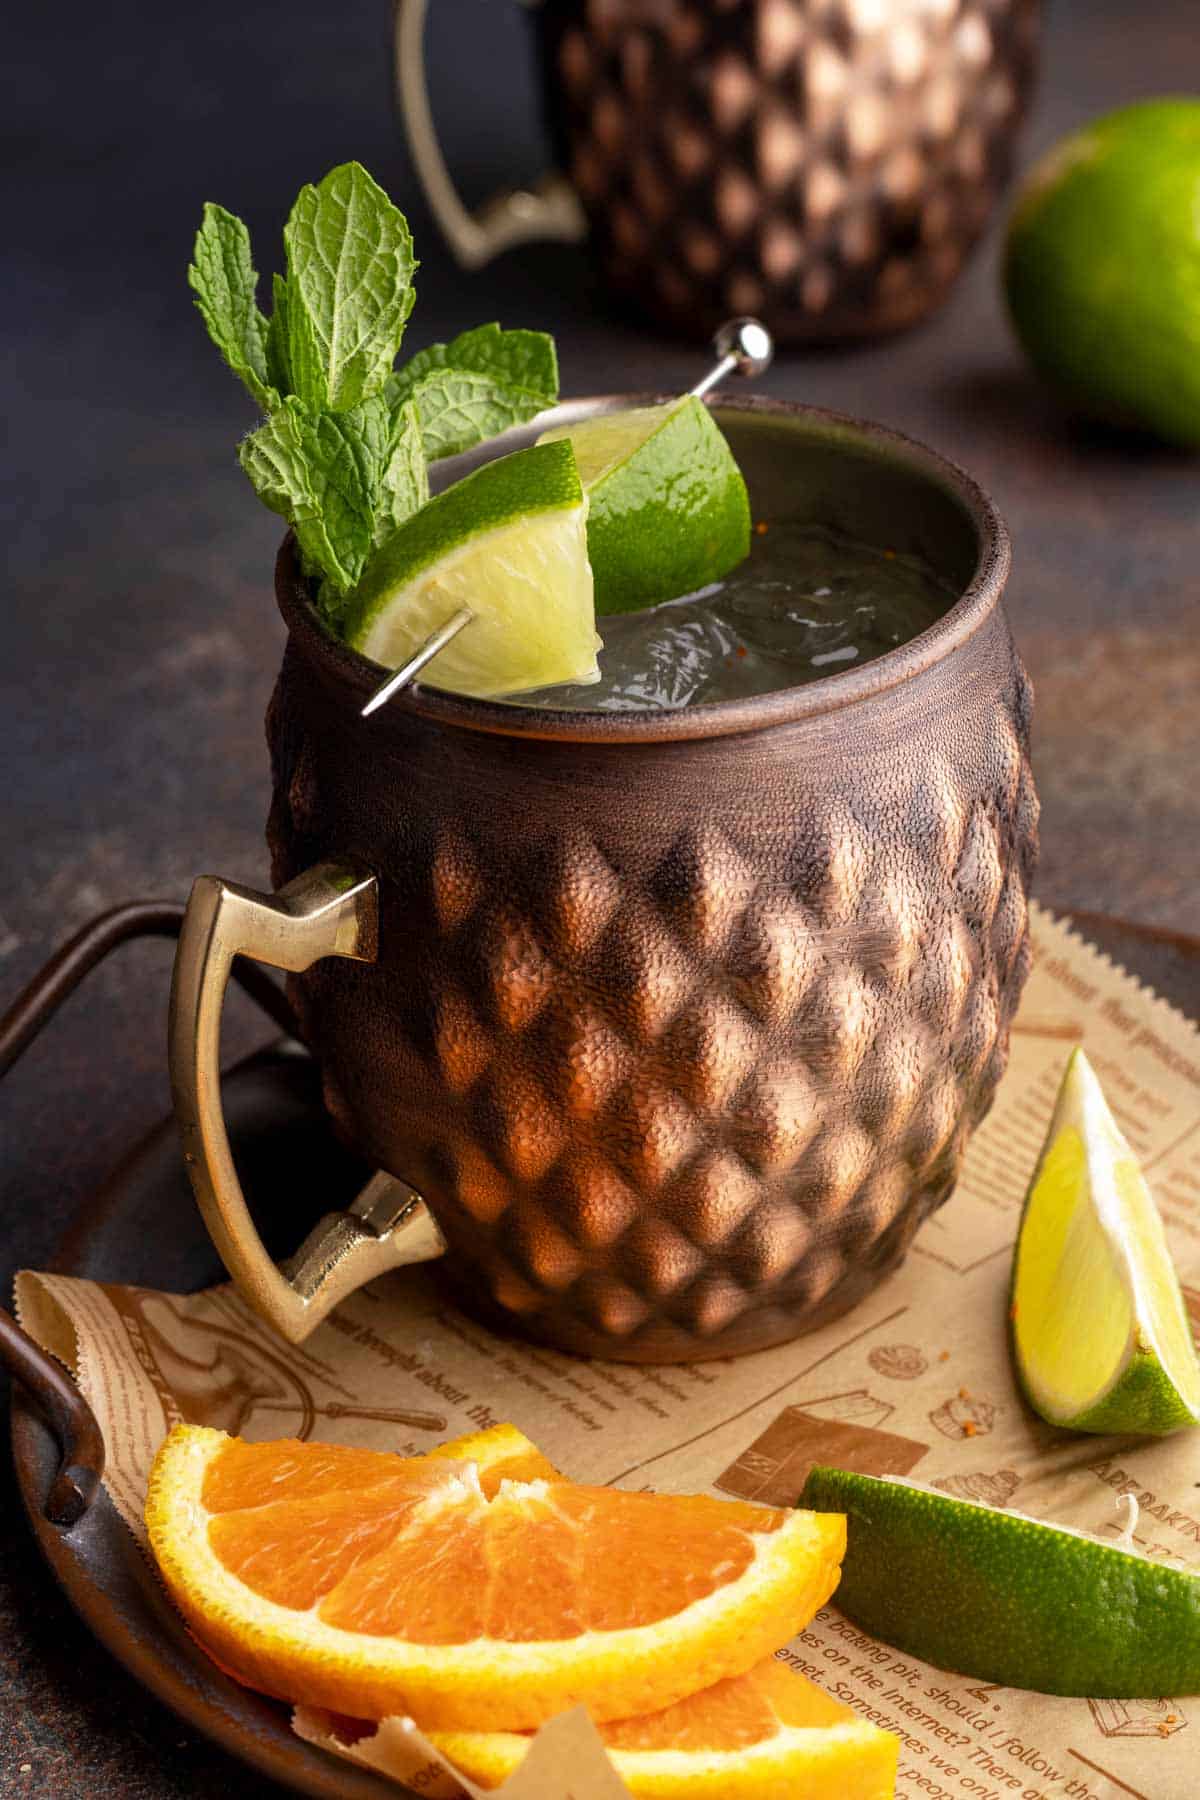 London mule with lime and mint leaves.